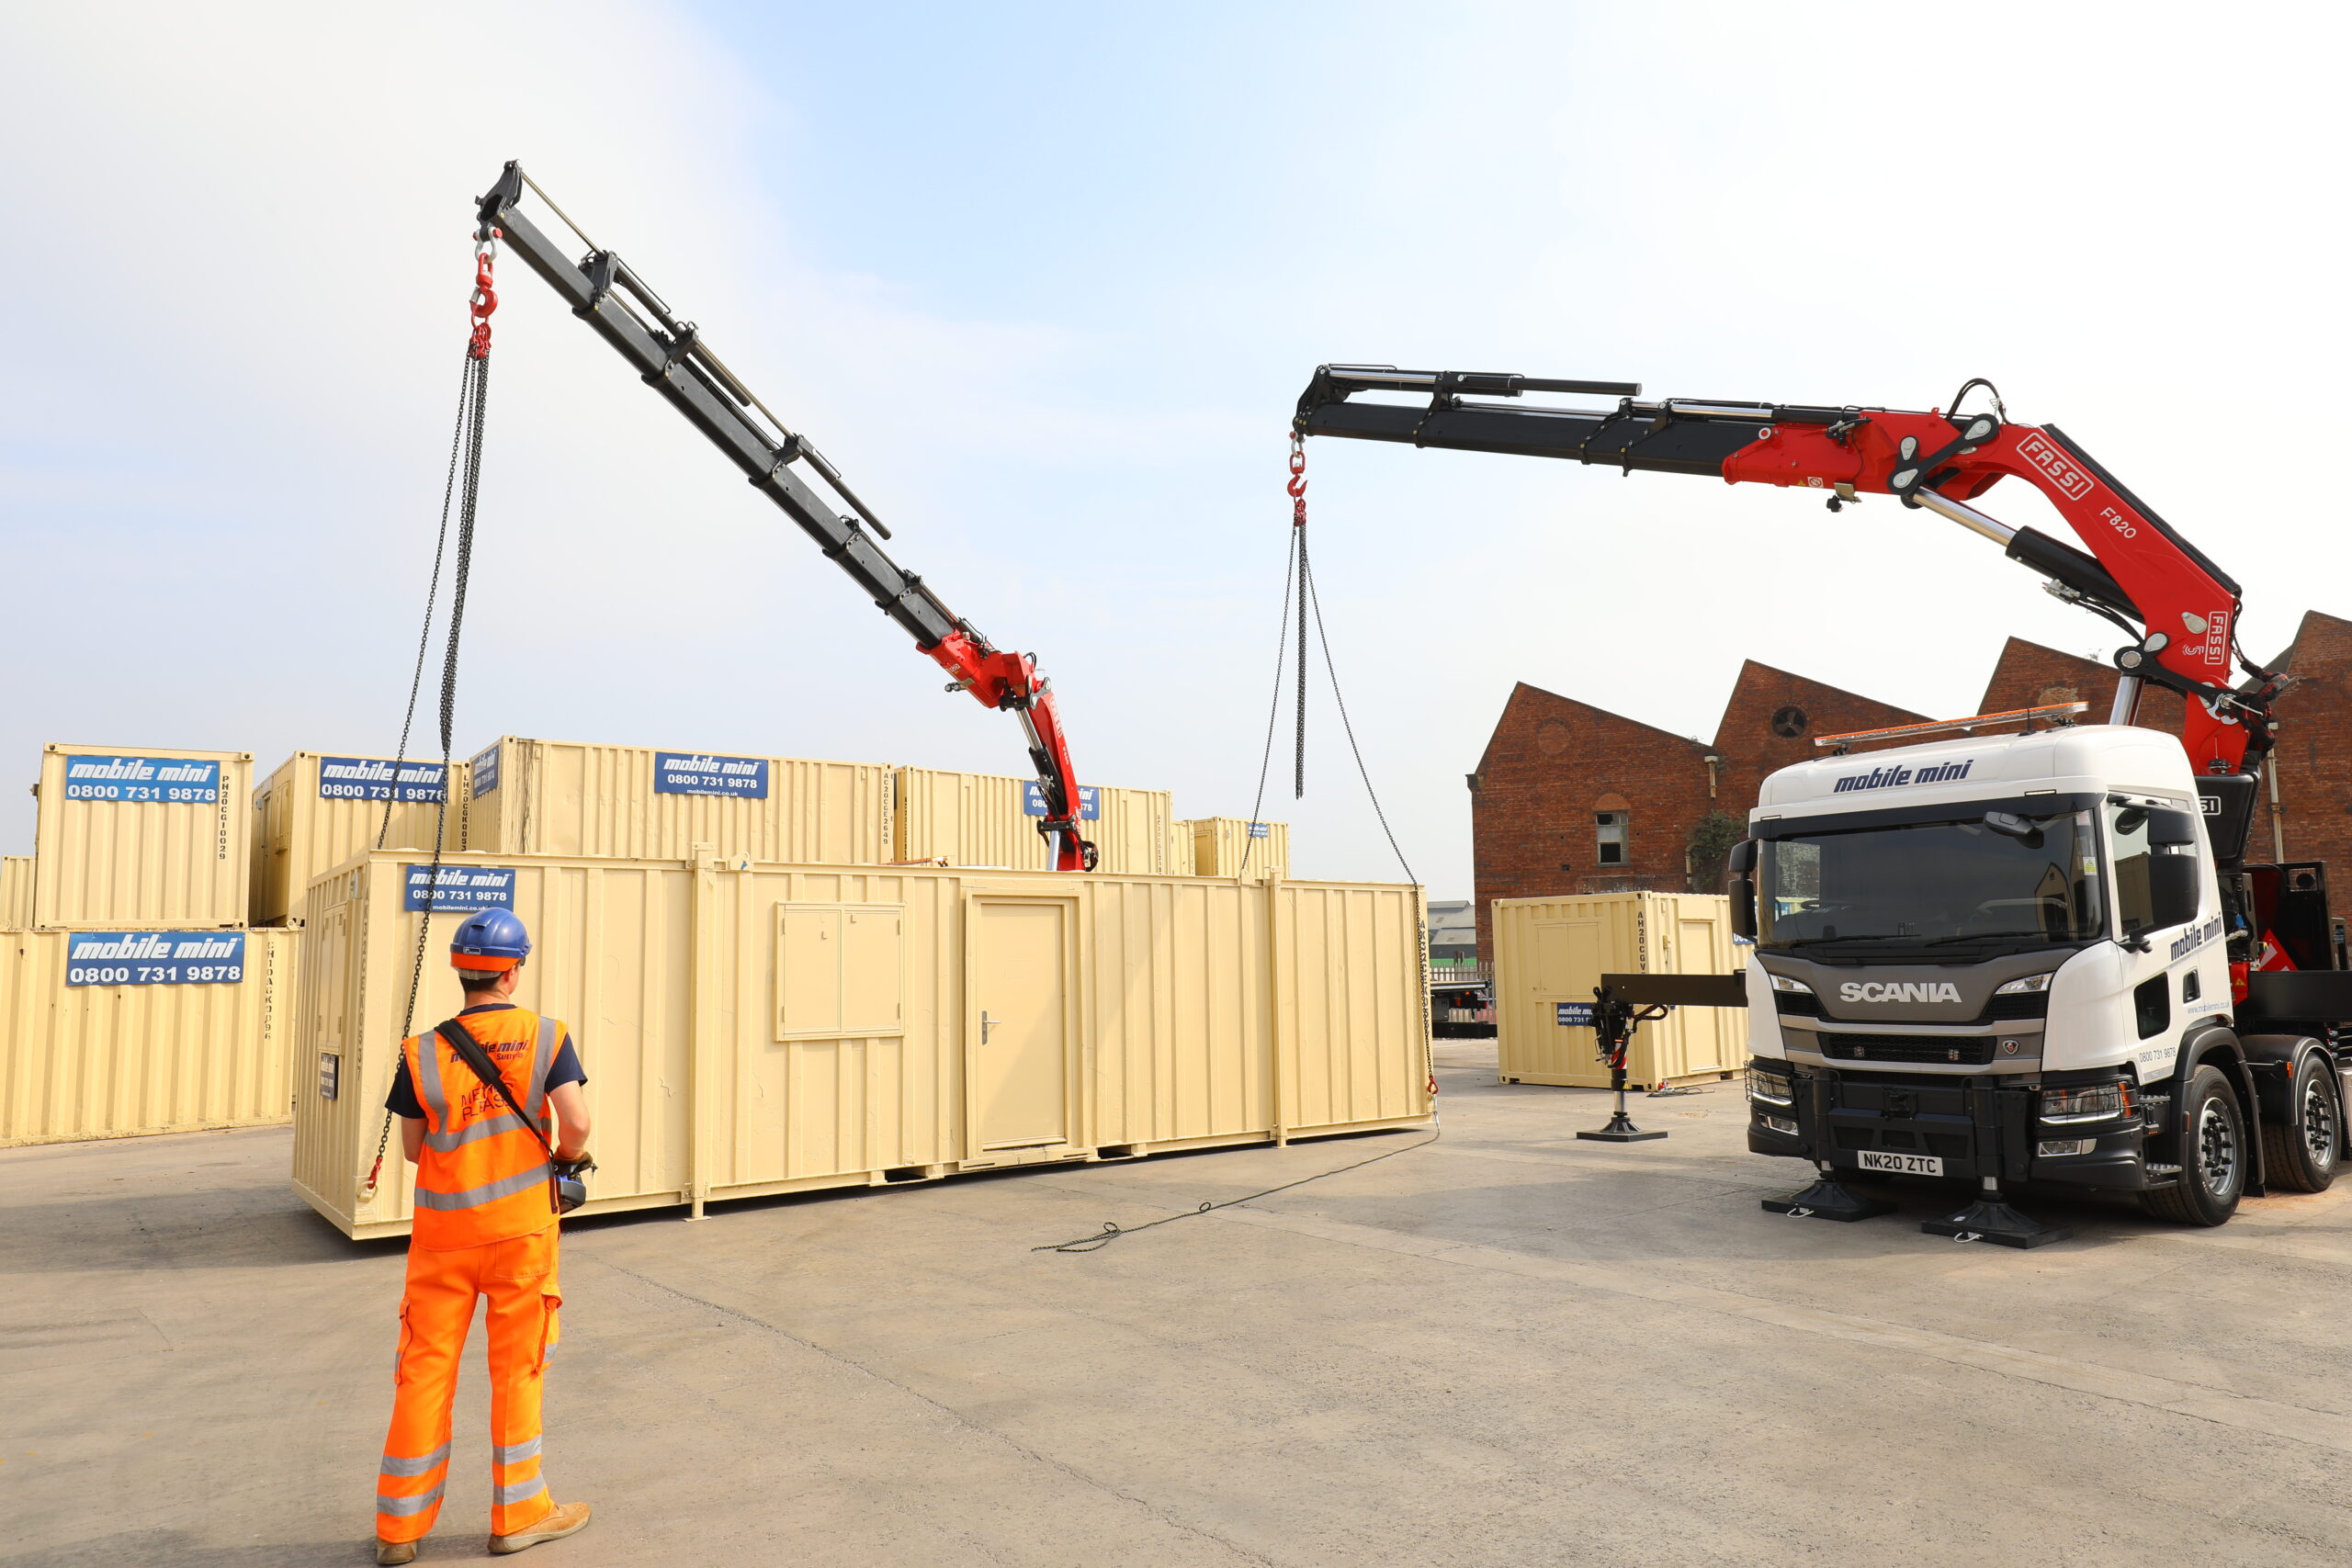 Planning a Site Office? Things to consider… @MobileMiniUK